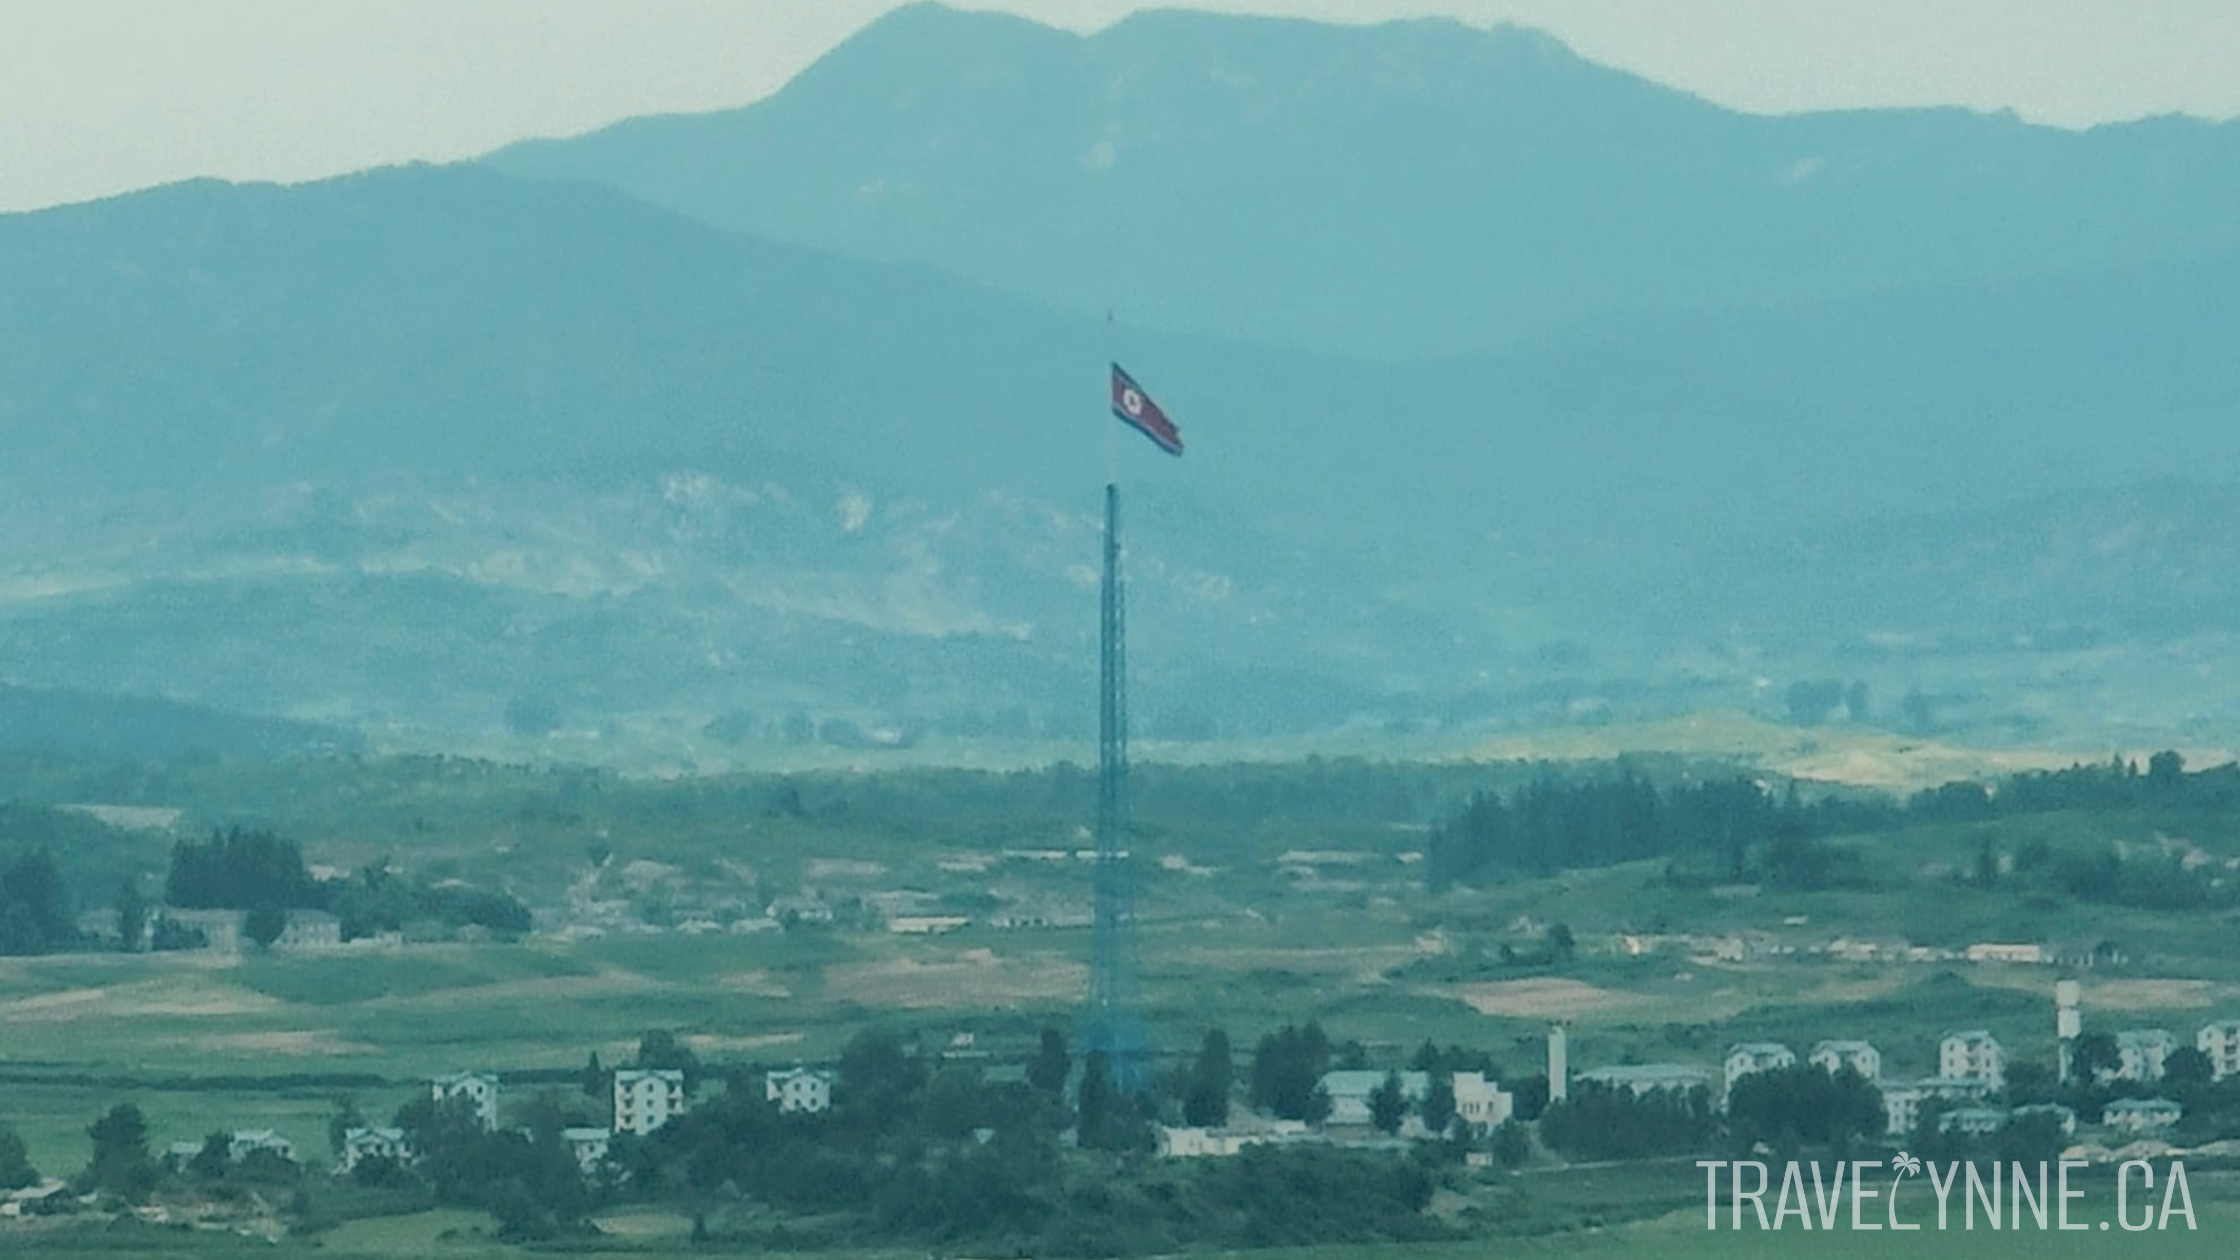 A 160 metre tall North Korean flag pole photographed from binoculars at the Dora Observatory in the DMZ.